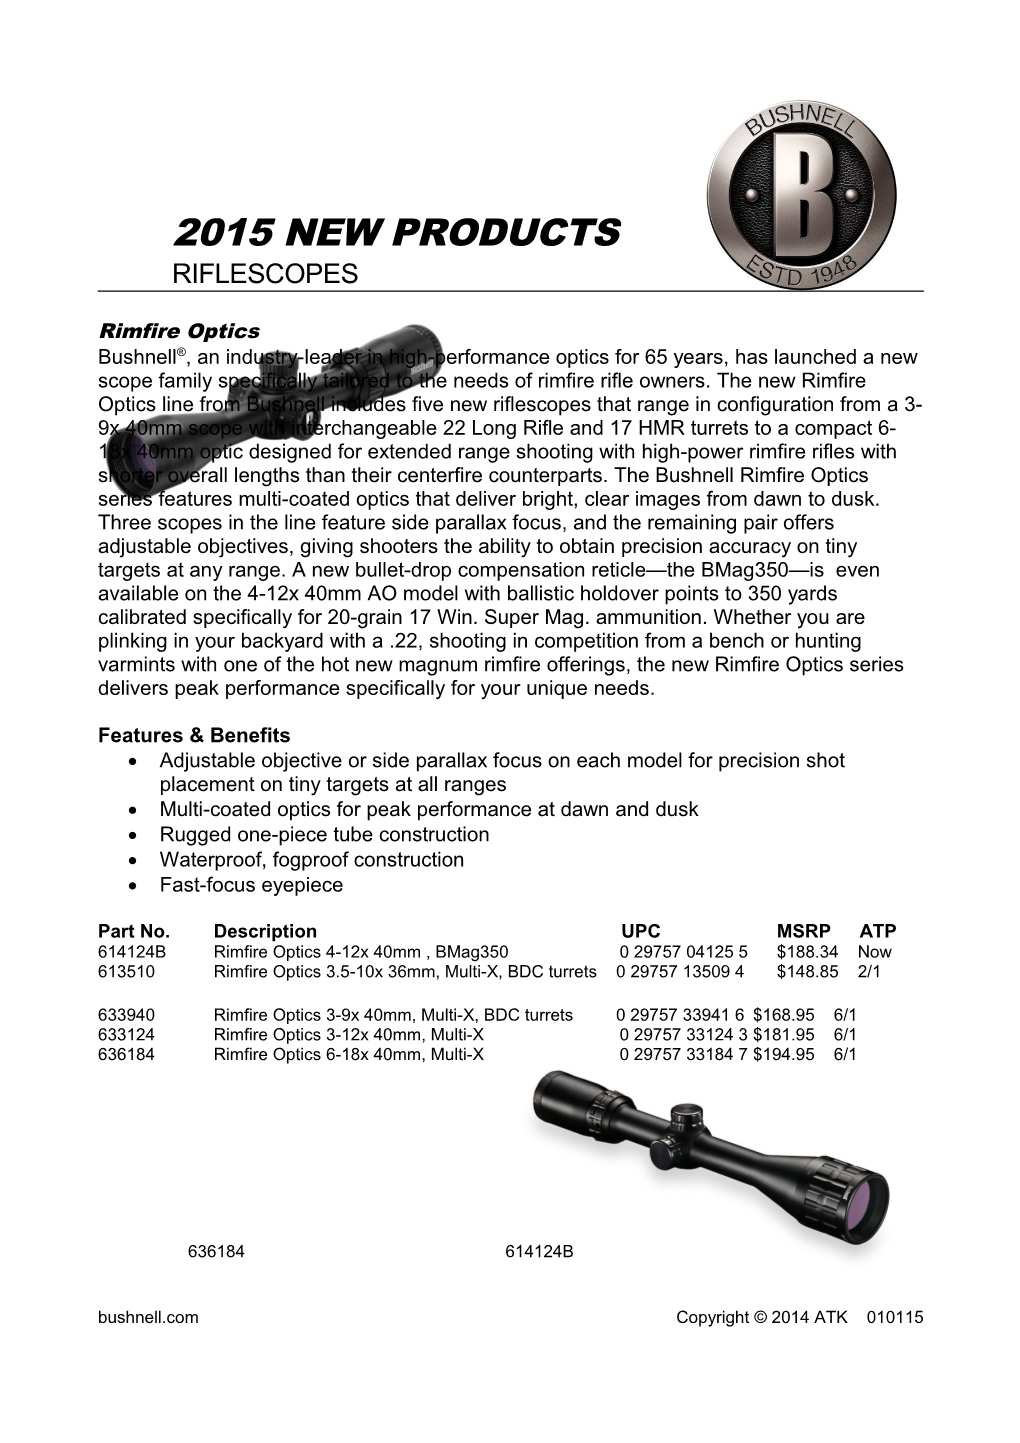 2015 New Products Riflescopes